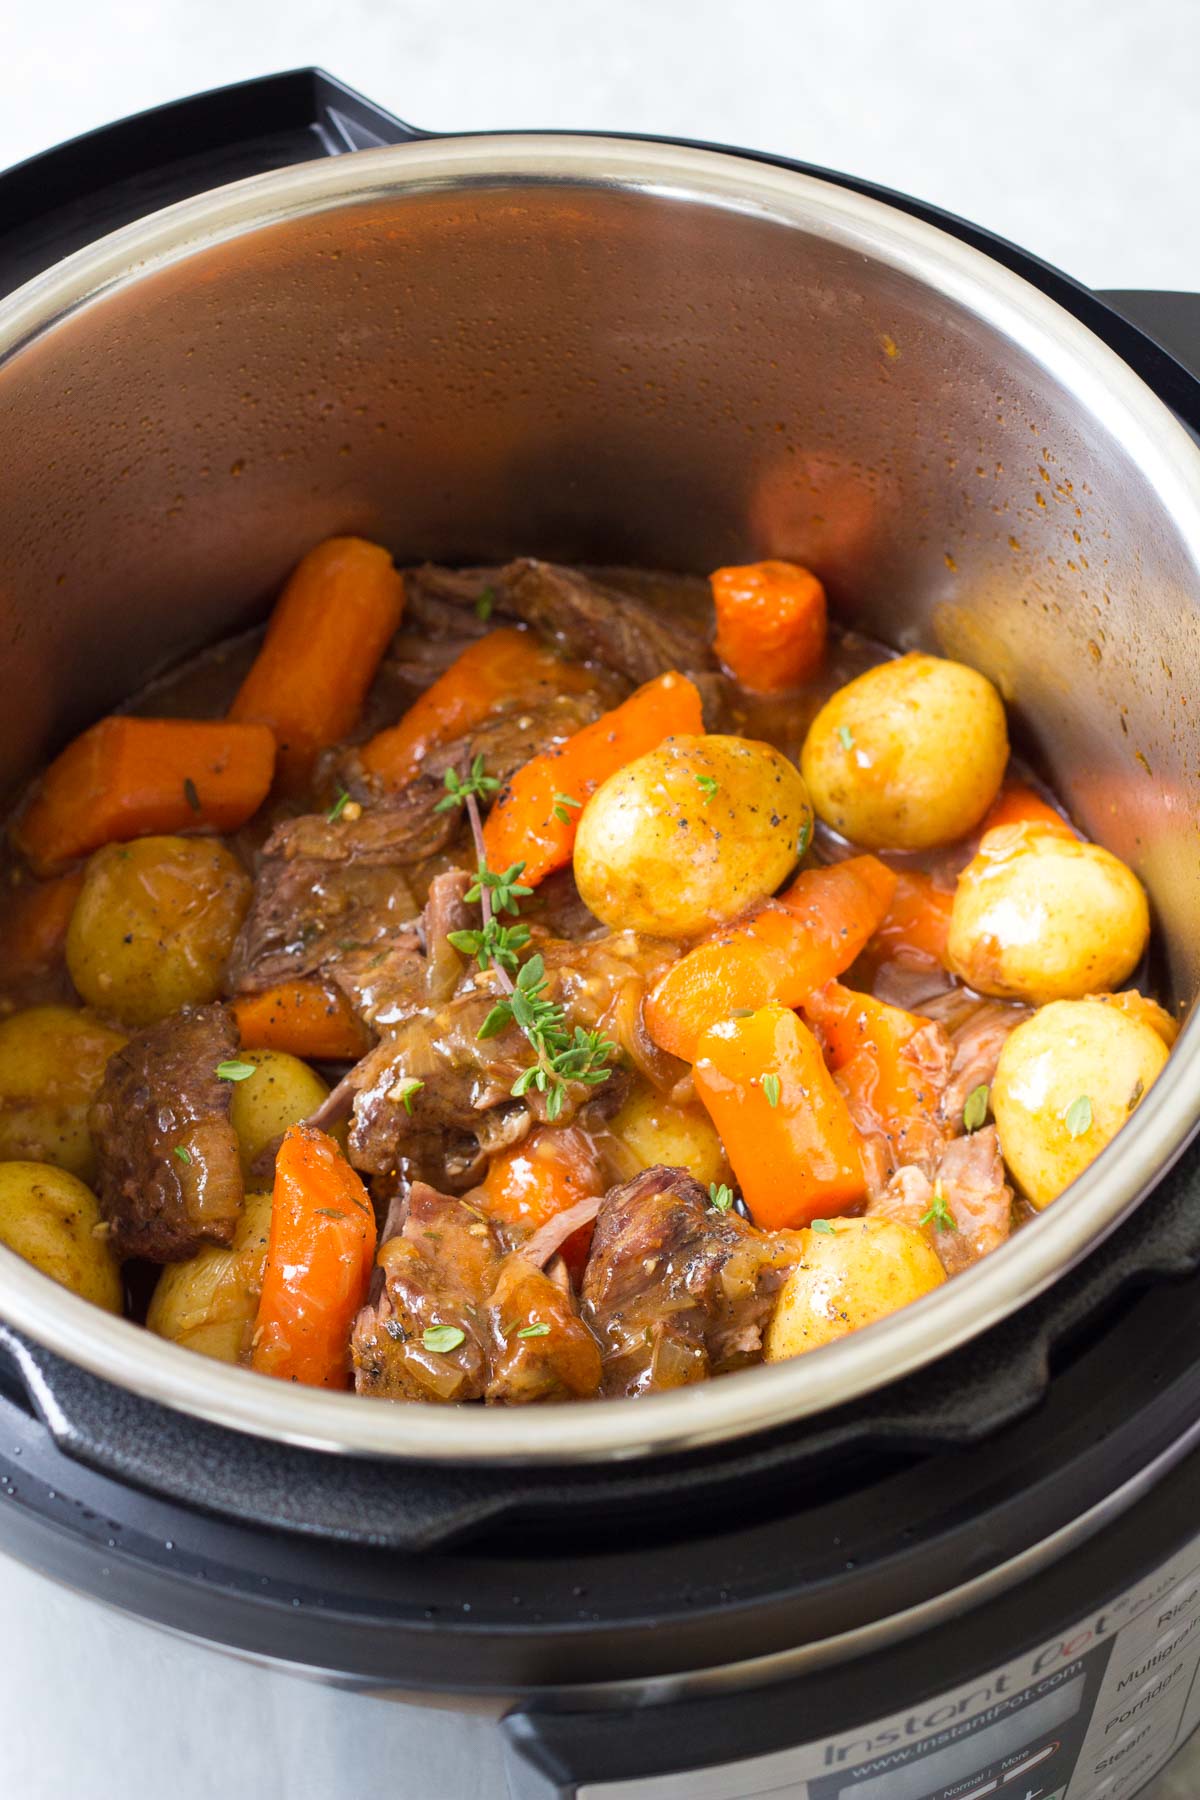 Pot roast in instant pot after cooking.